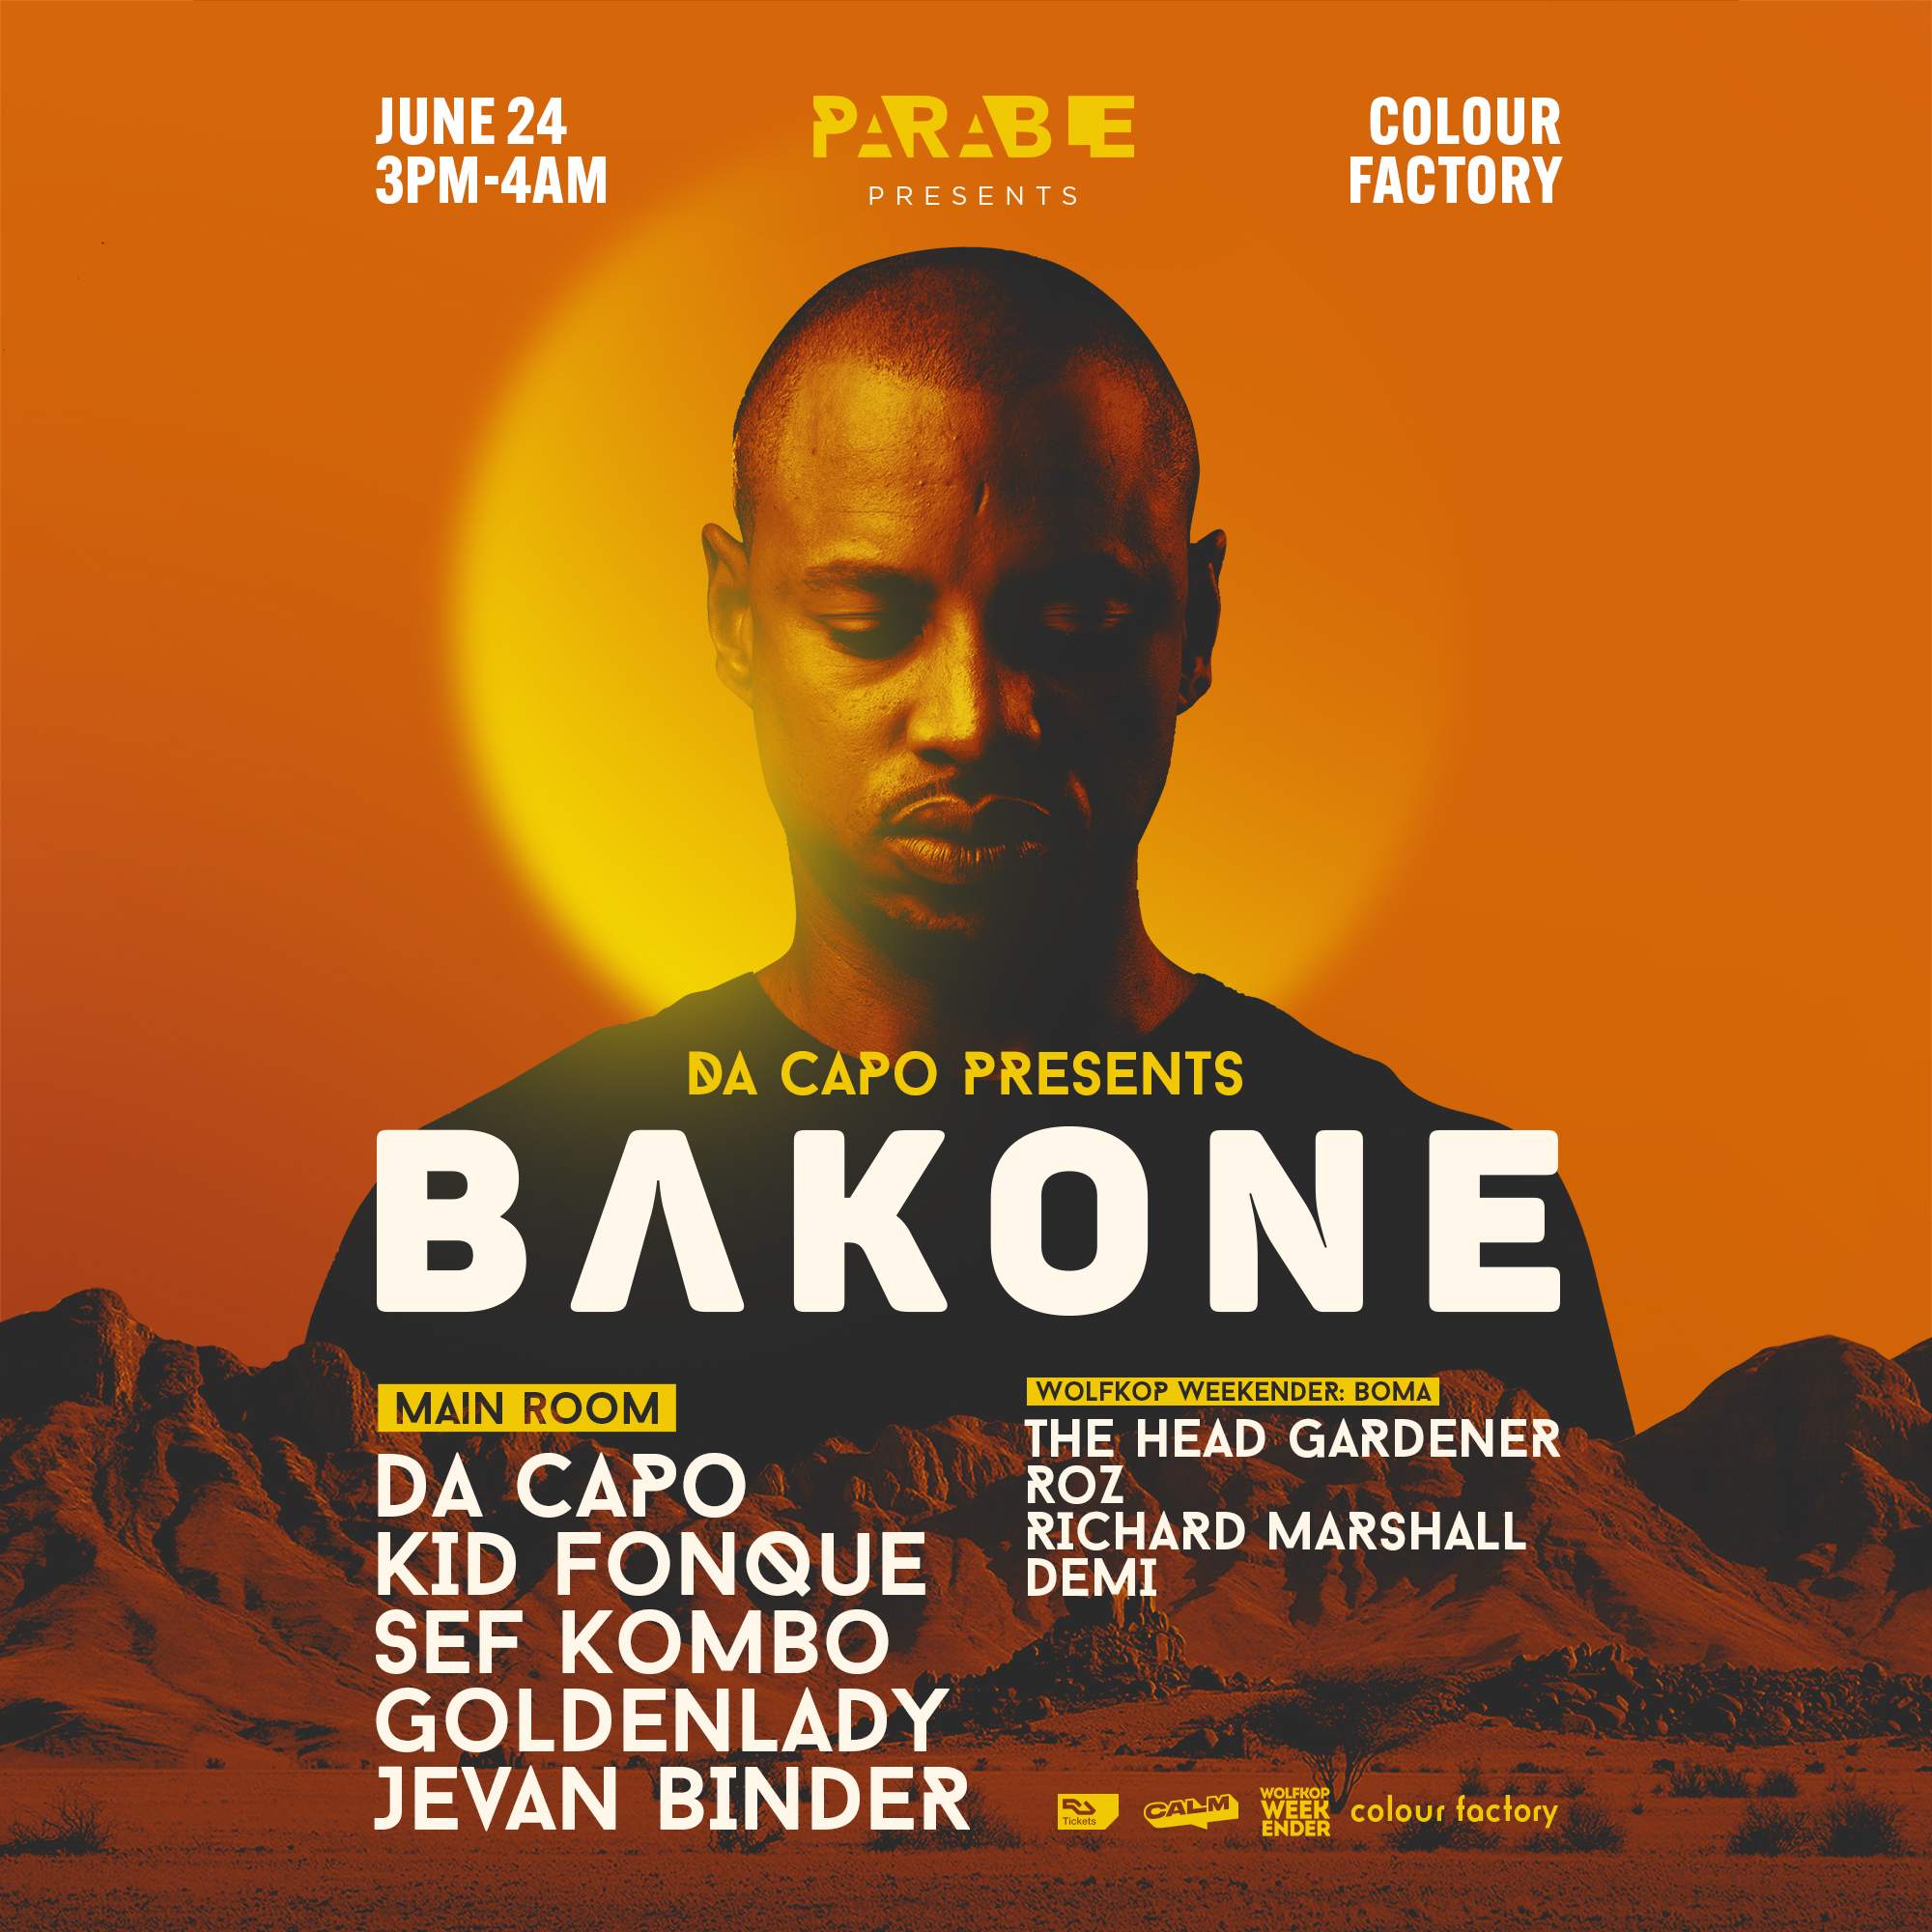 Parable's Summer afro-tech day & night:  Da Capo, Kid Fonque, Sef Kombo - フライヤー表